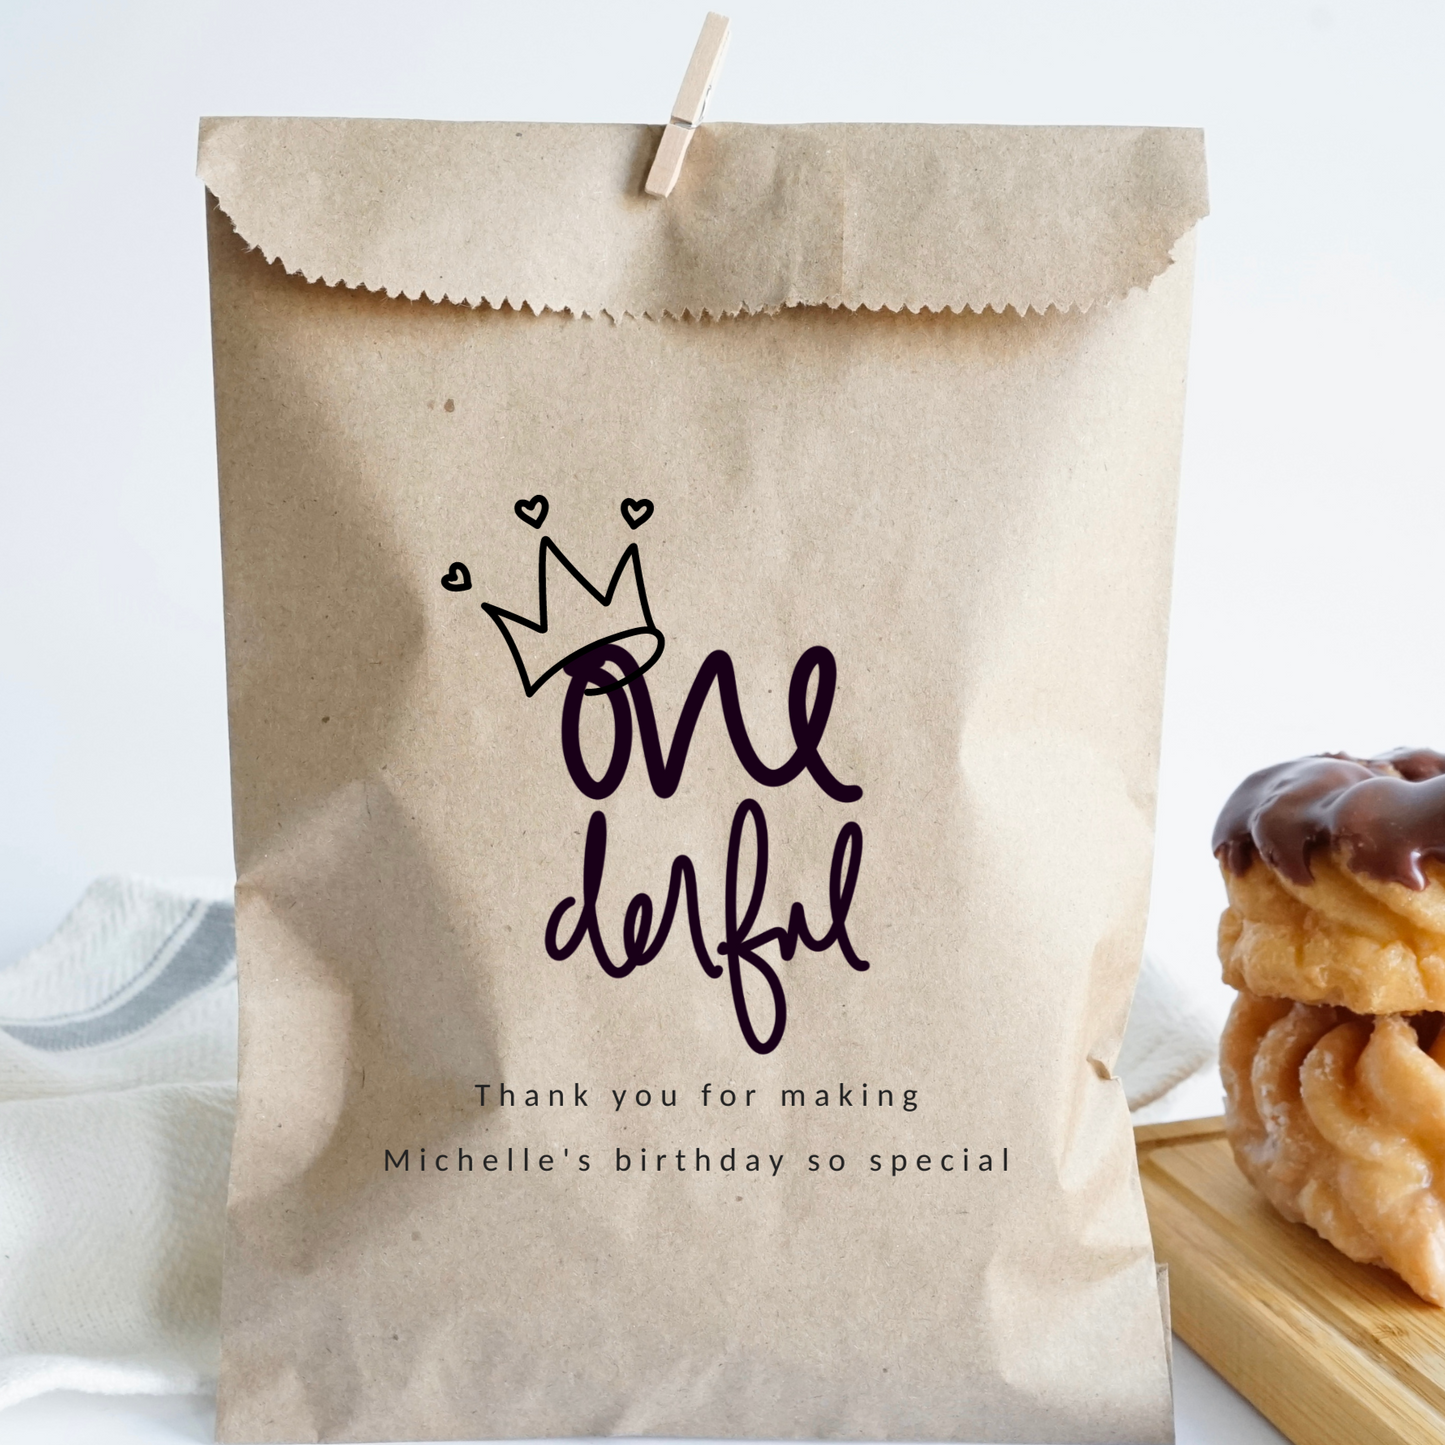 These durable paper bags make great party packaging, adding a nice touch to celebrate your little one turning ONE. Use them as favor bags, thank you favors, candy bags, coffee bags, loot bags, the possibilities are endless!  Your guests will appreciate the sweet reminder of your special day!